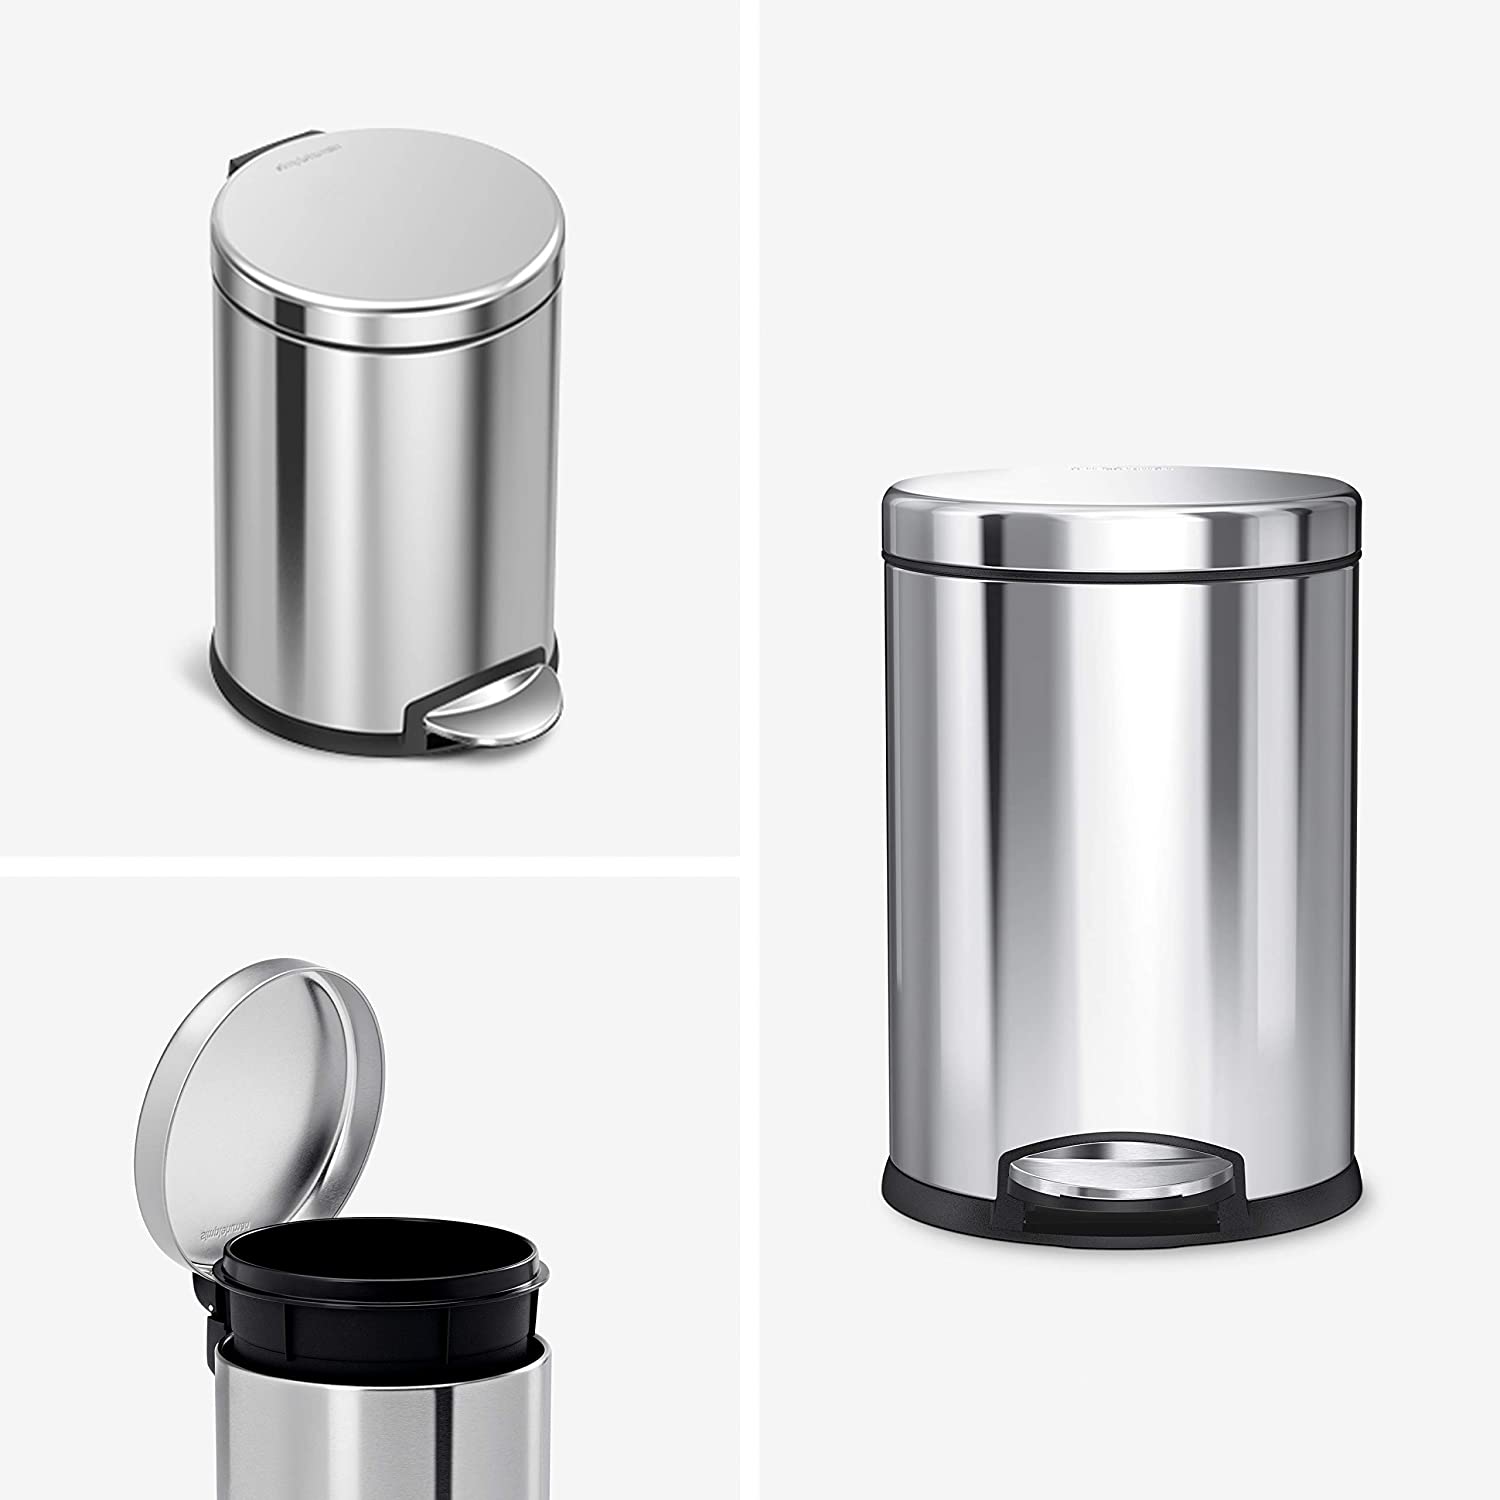 simplehuman 4.5 Liter : 1.2 Gallon Round Bathroom Step Trash Can, Polished Stainless Steel